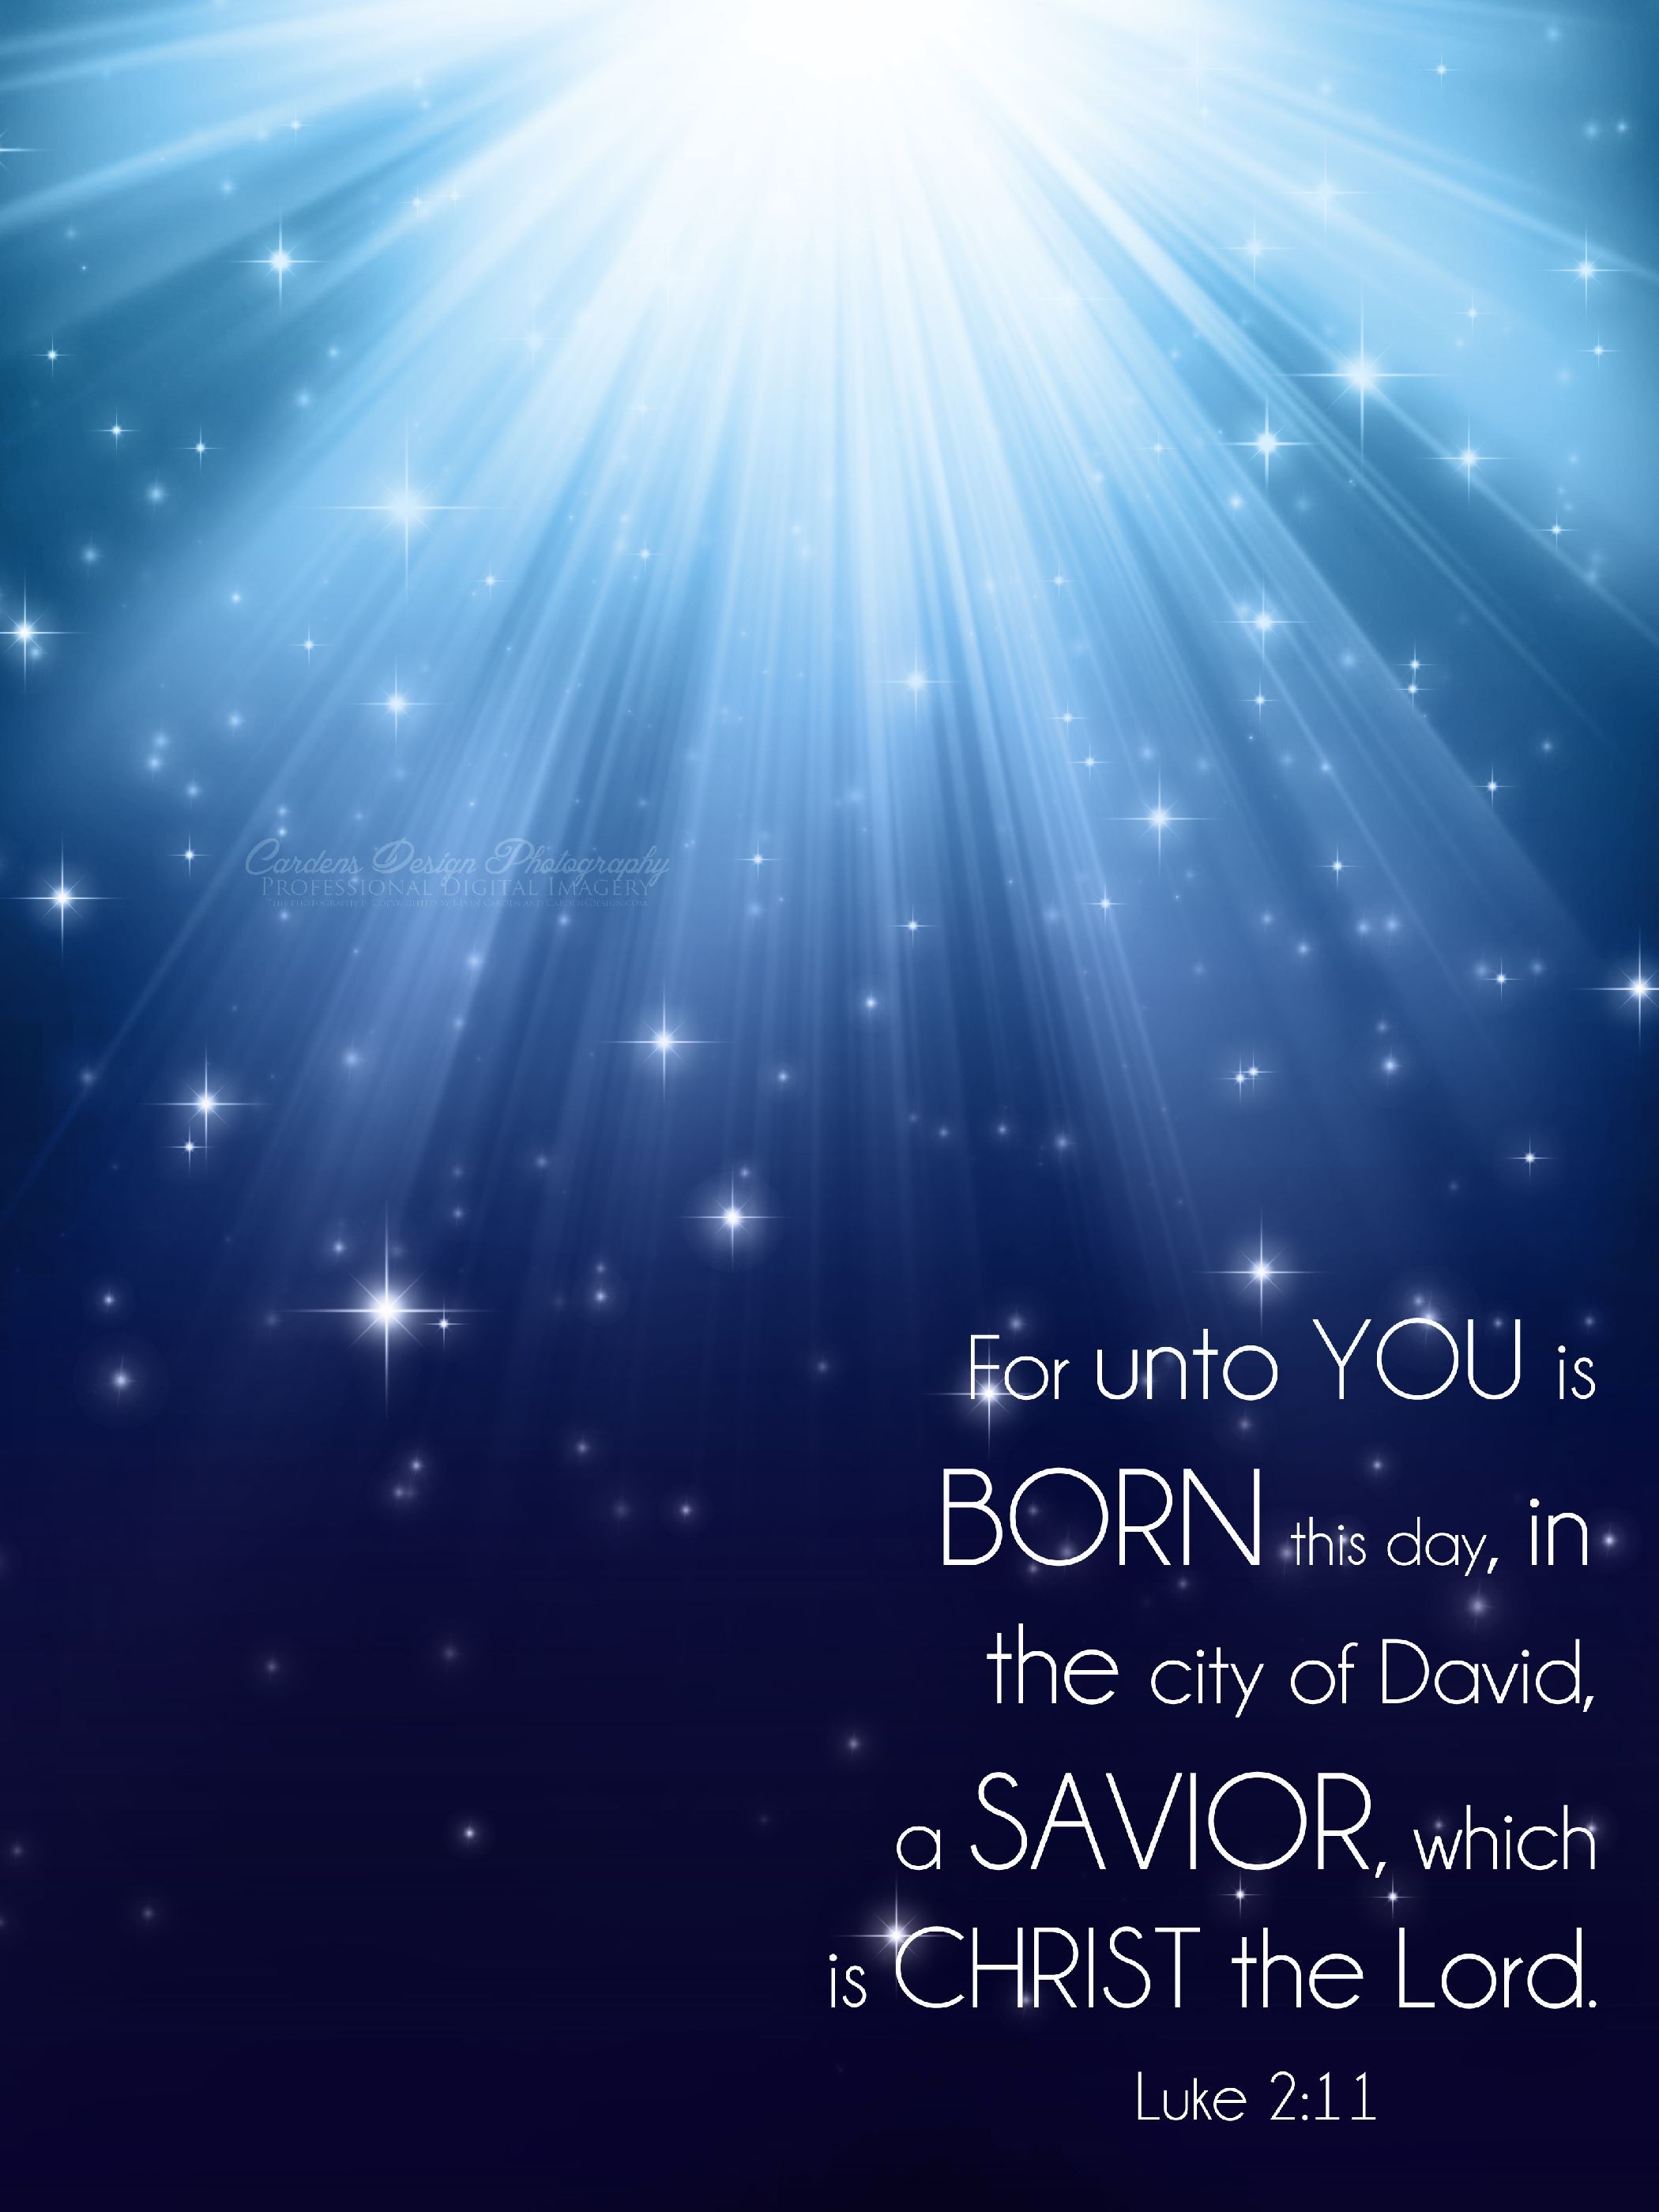 51+ Christian backgrounds  Download free High Resolution wallpapers ...